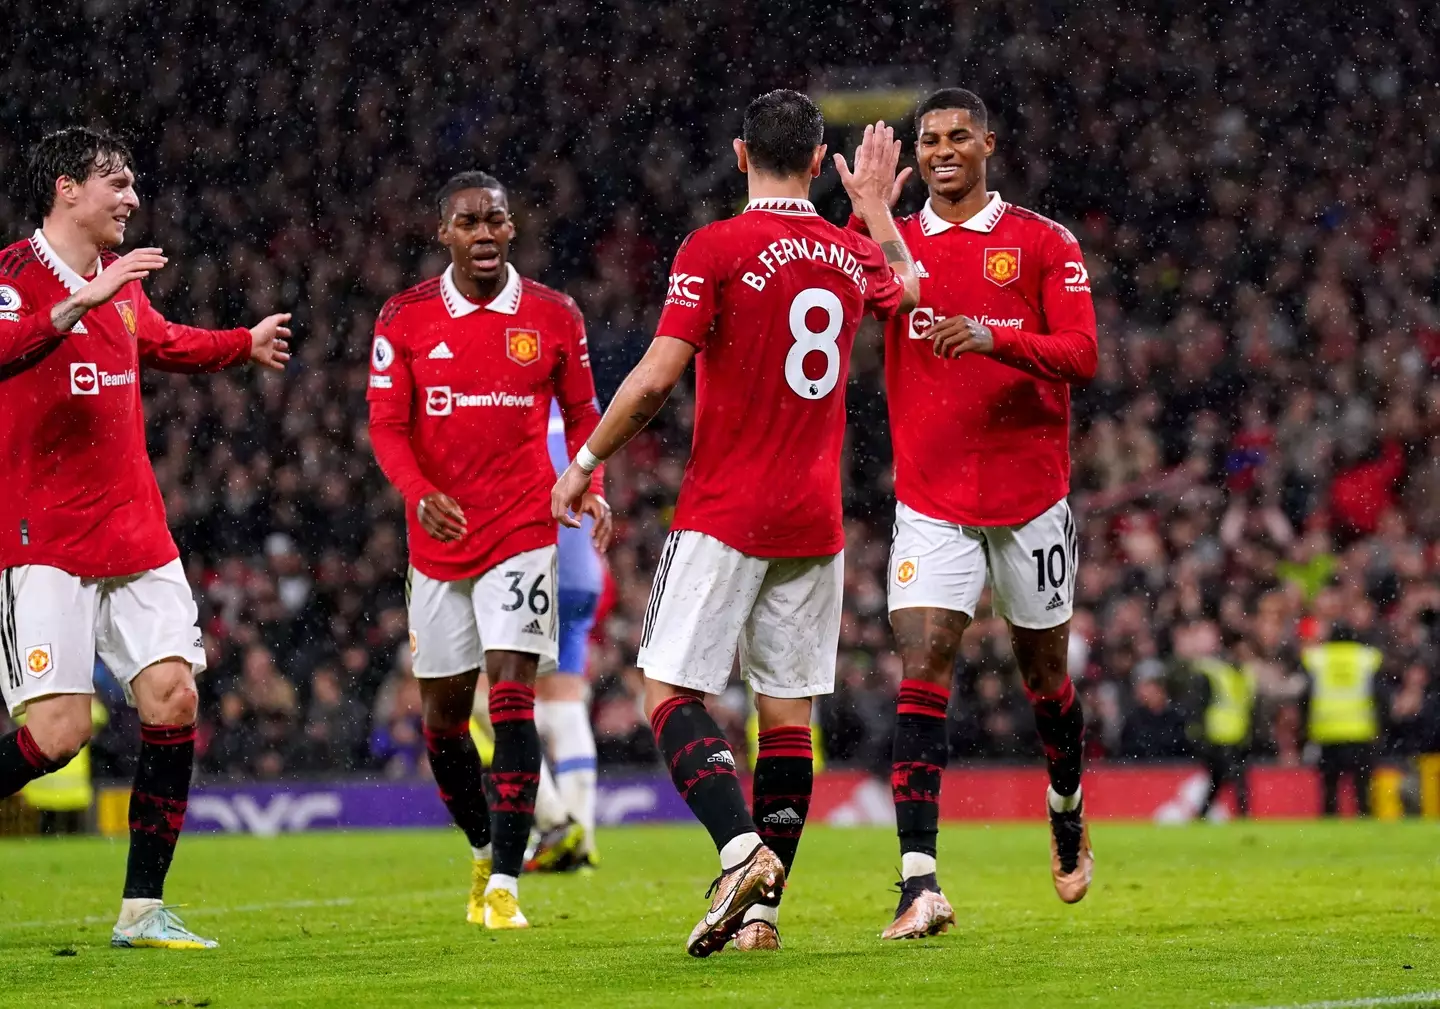 United's recent form has some believing they could battle for the title. Image: Alamy